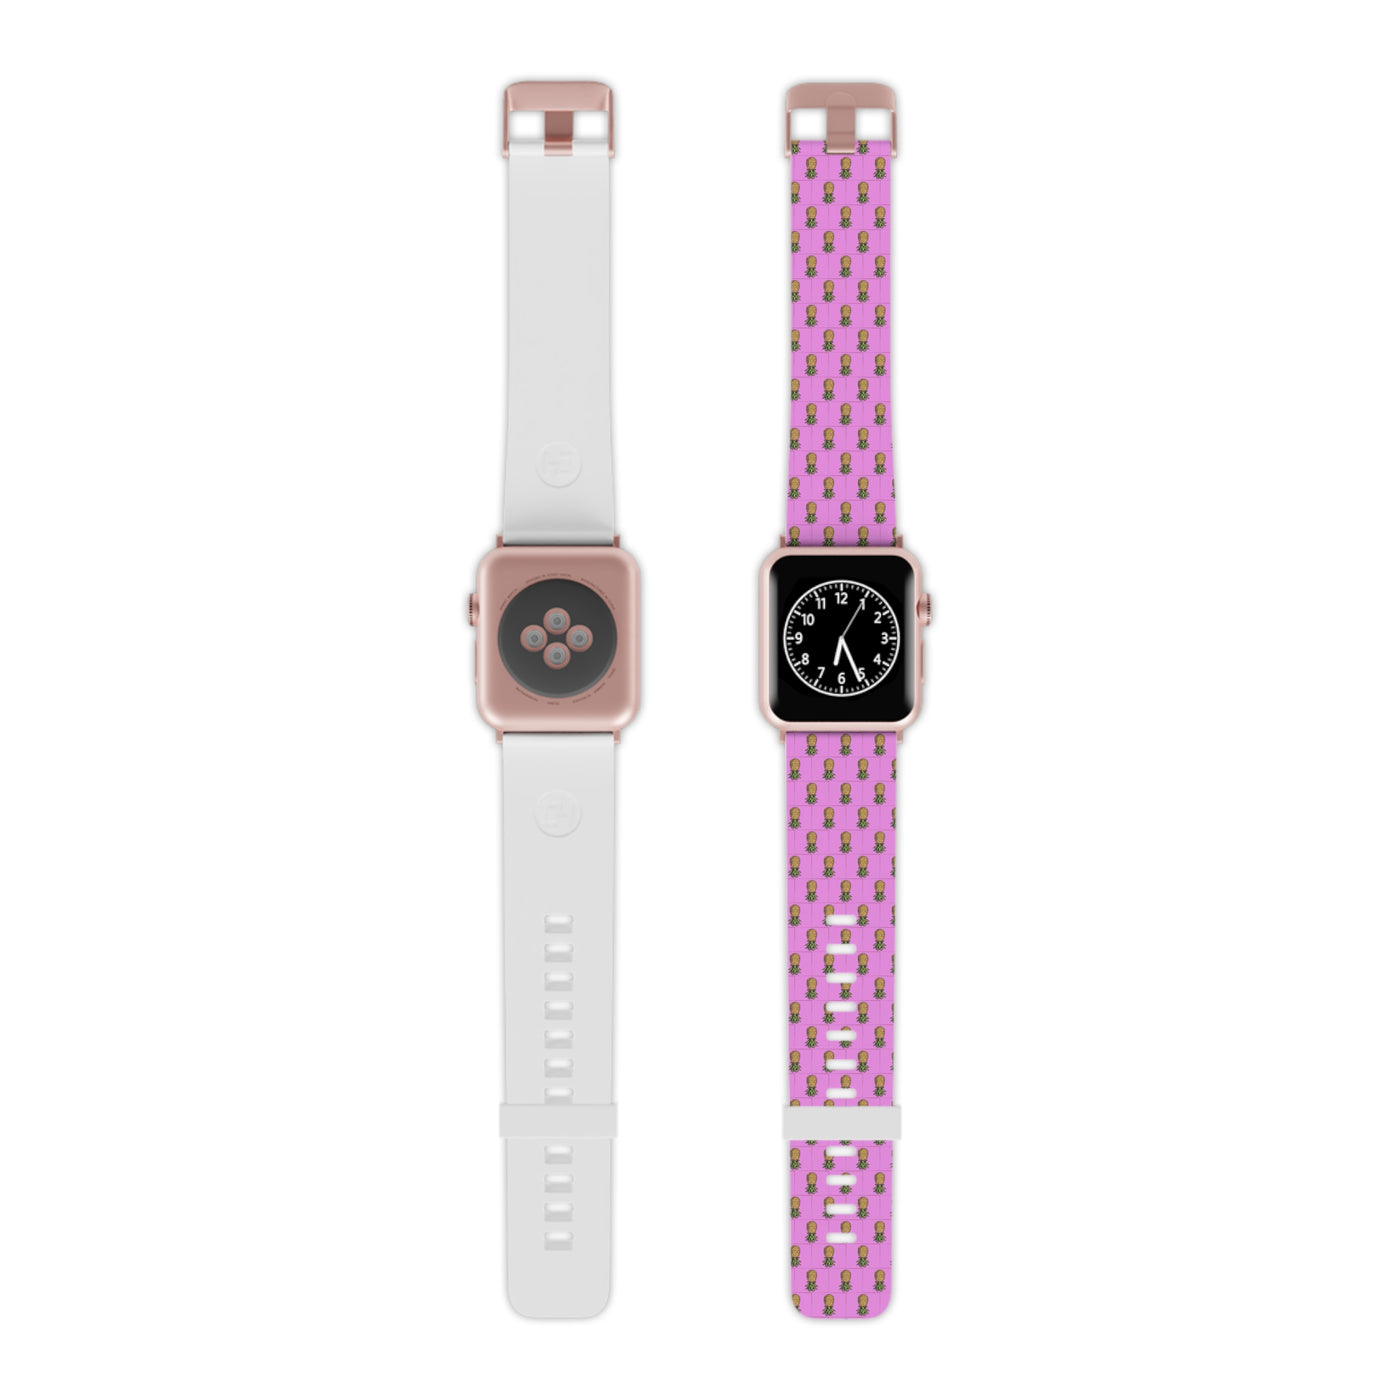 8-BIT Pink Watch Band for Apple Watch